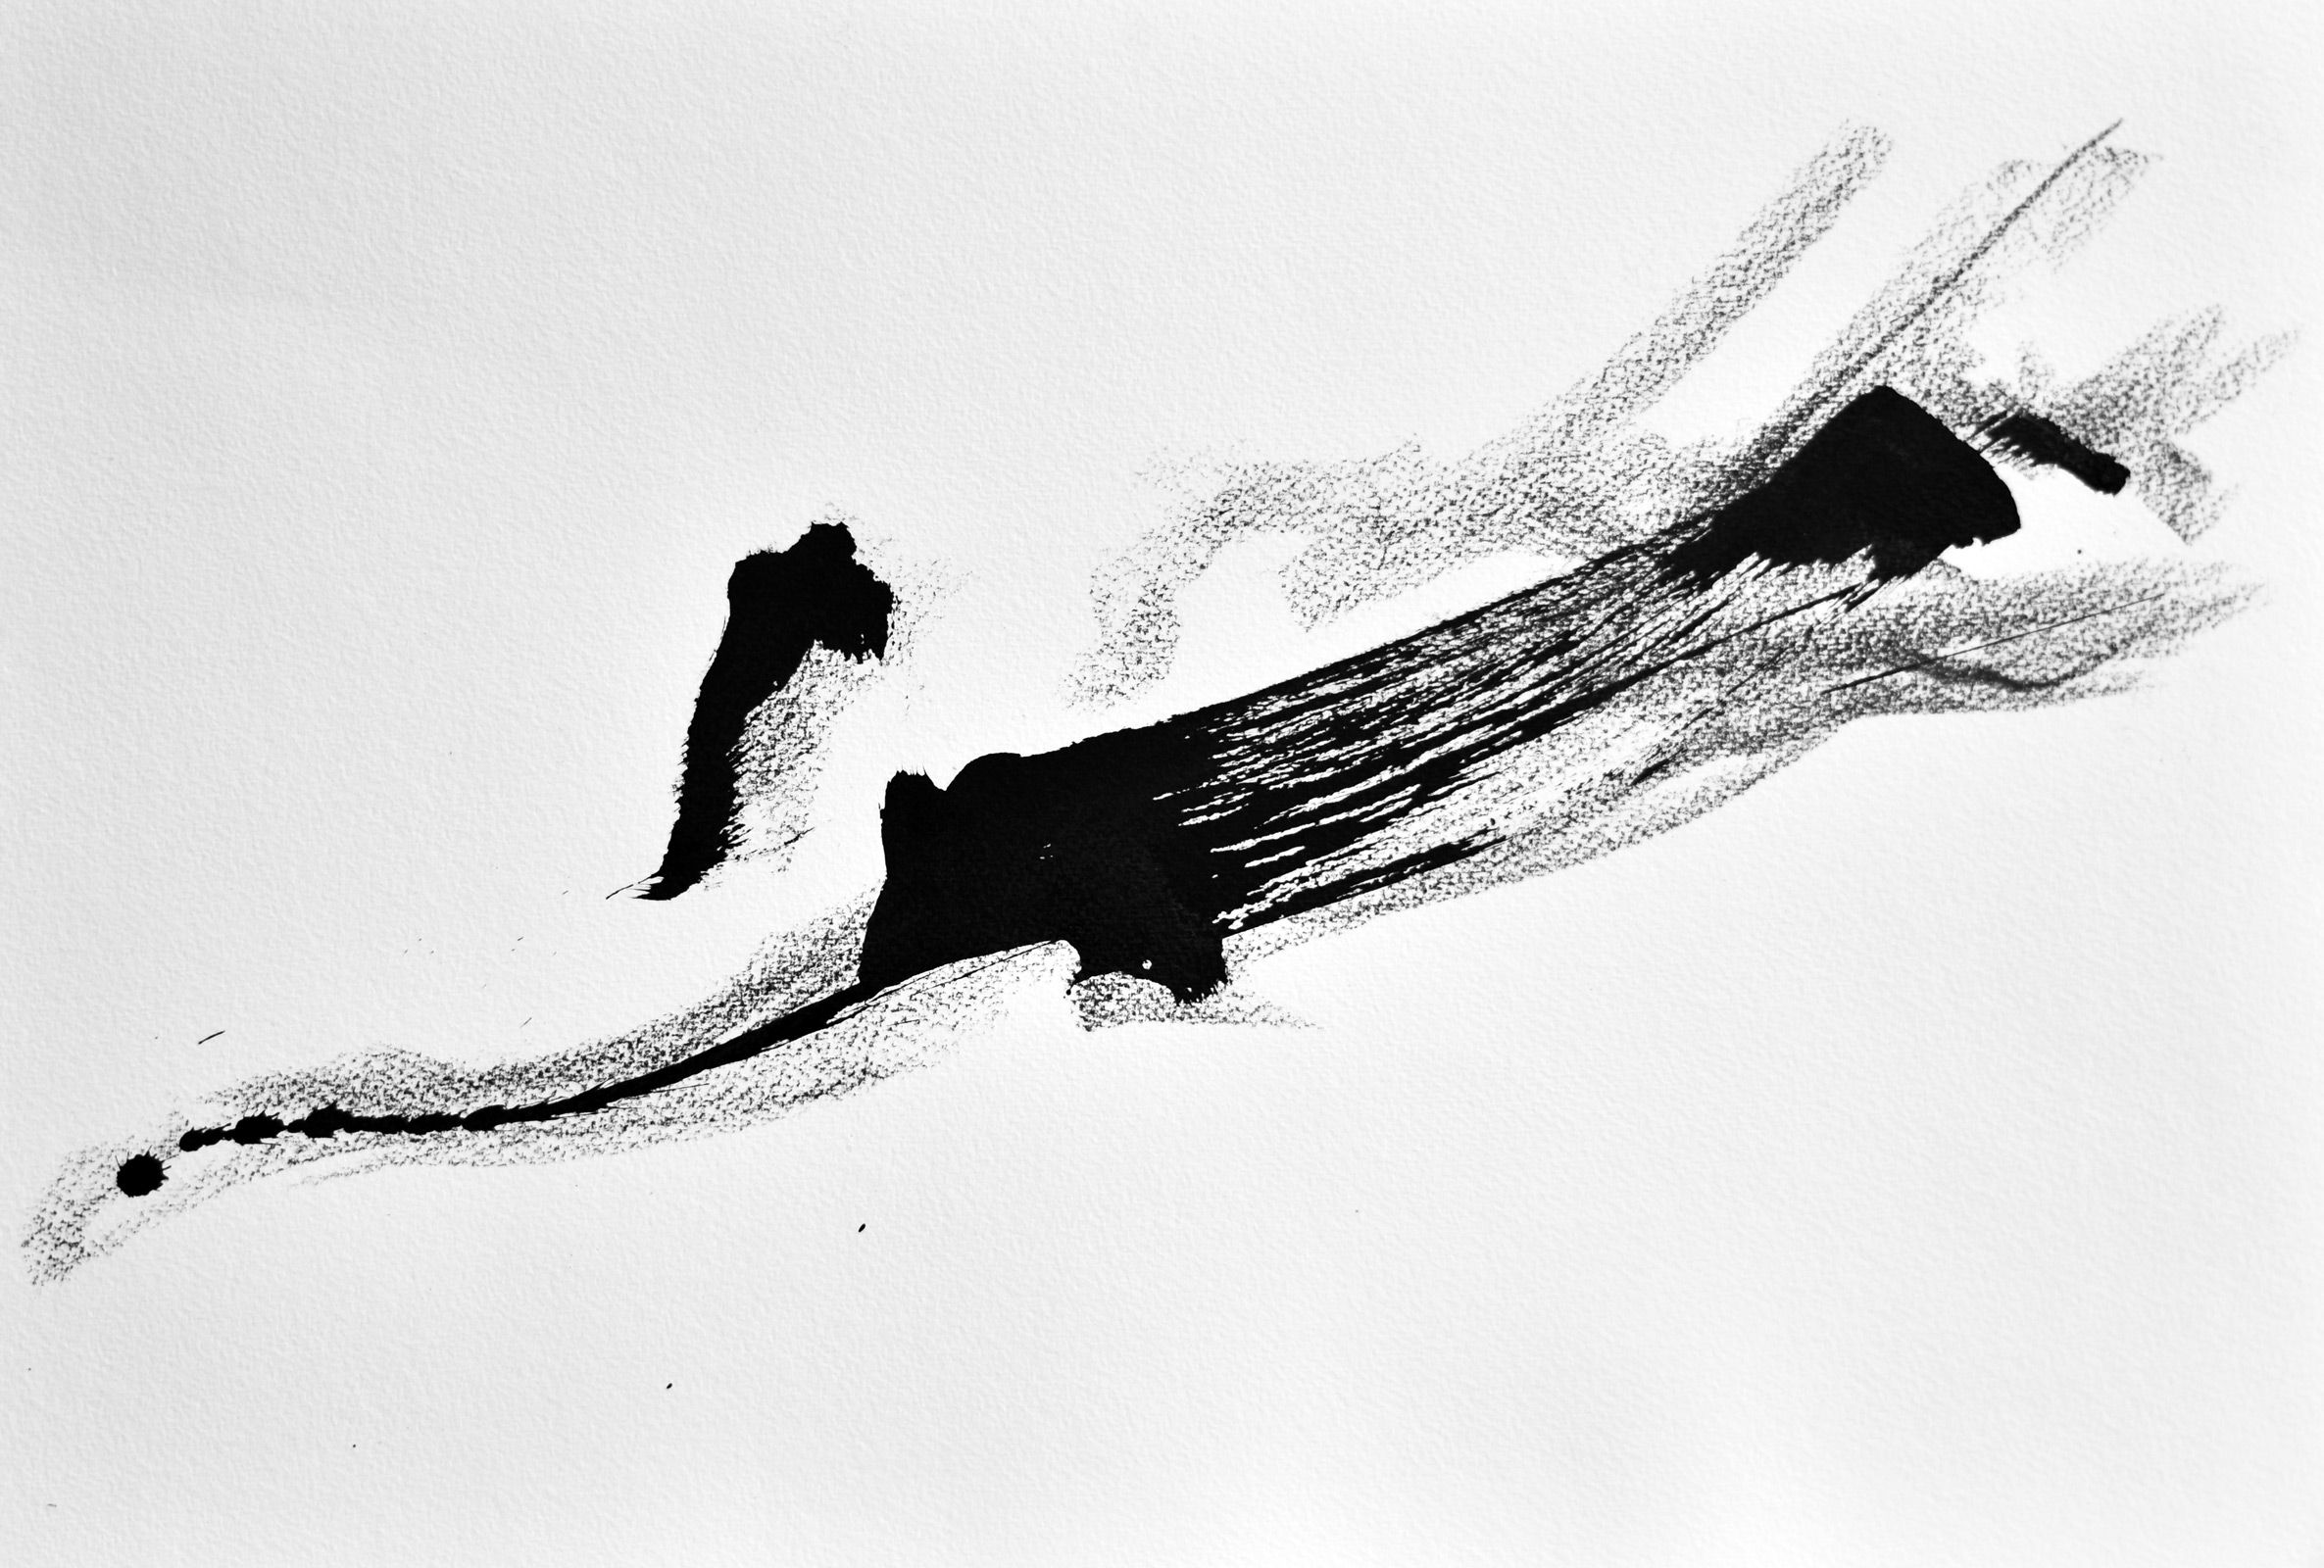 Movement Left, 2018, drawing by Adrian Mauriks.